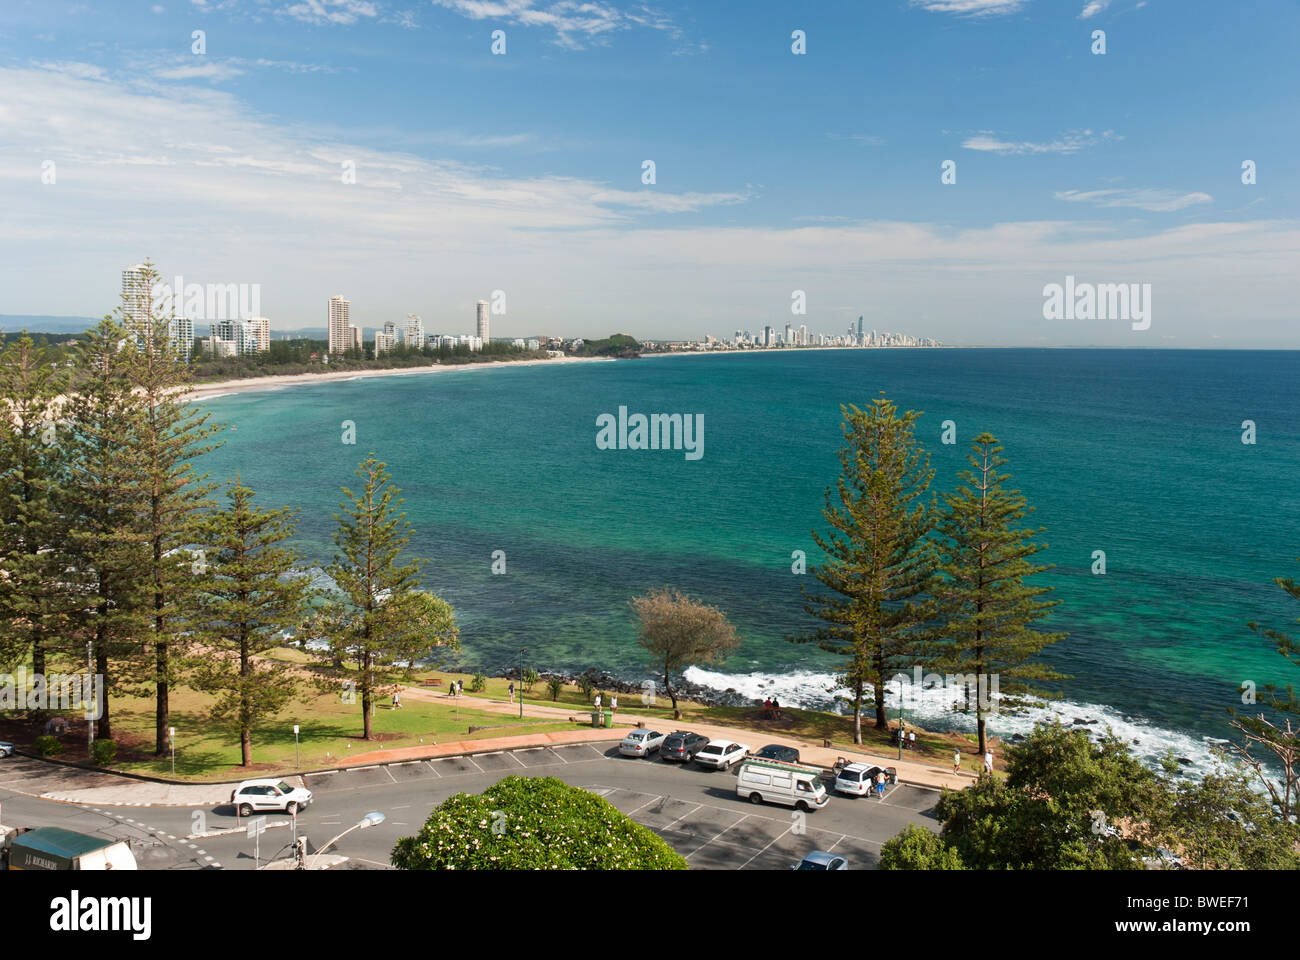 The view of Burleigh Heads looking across to Surfers Paradise in south east Queensland, Australia. Stock Photo